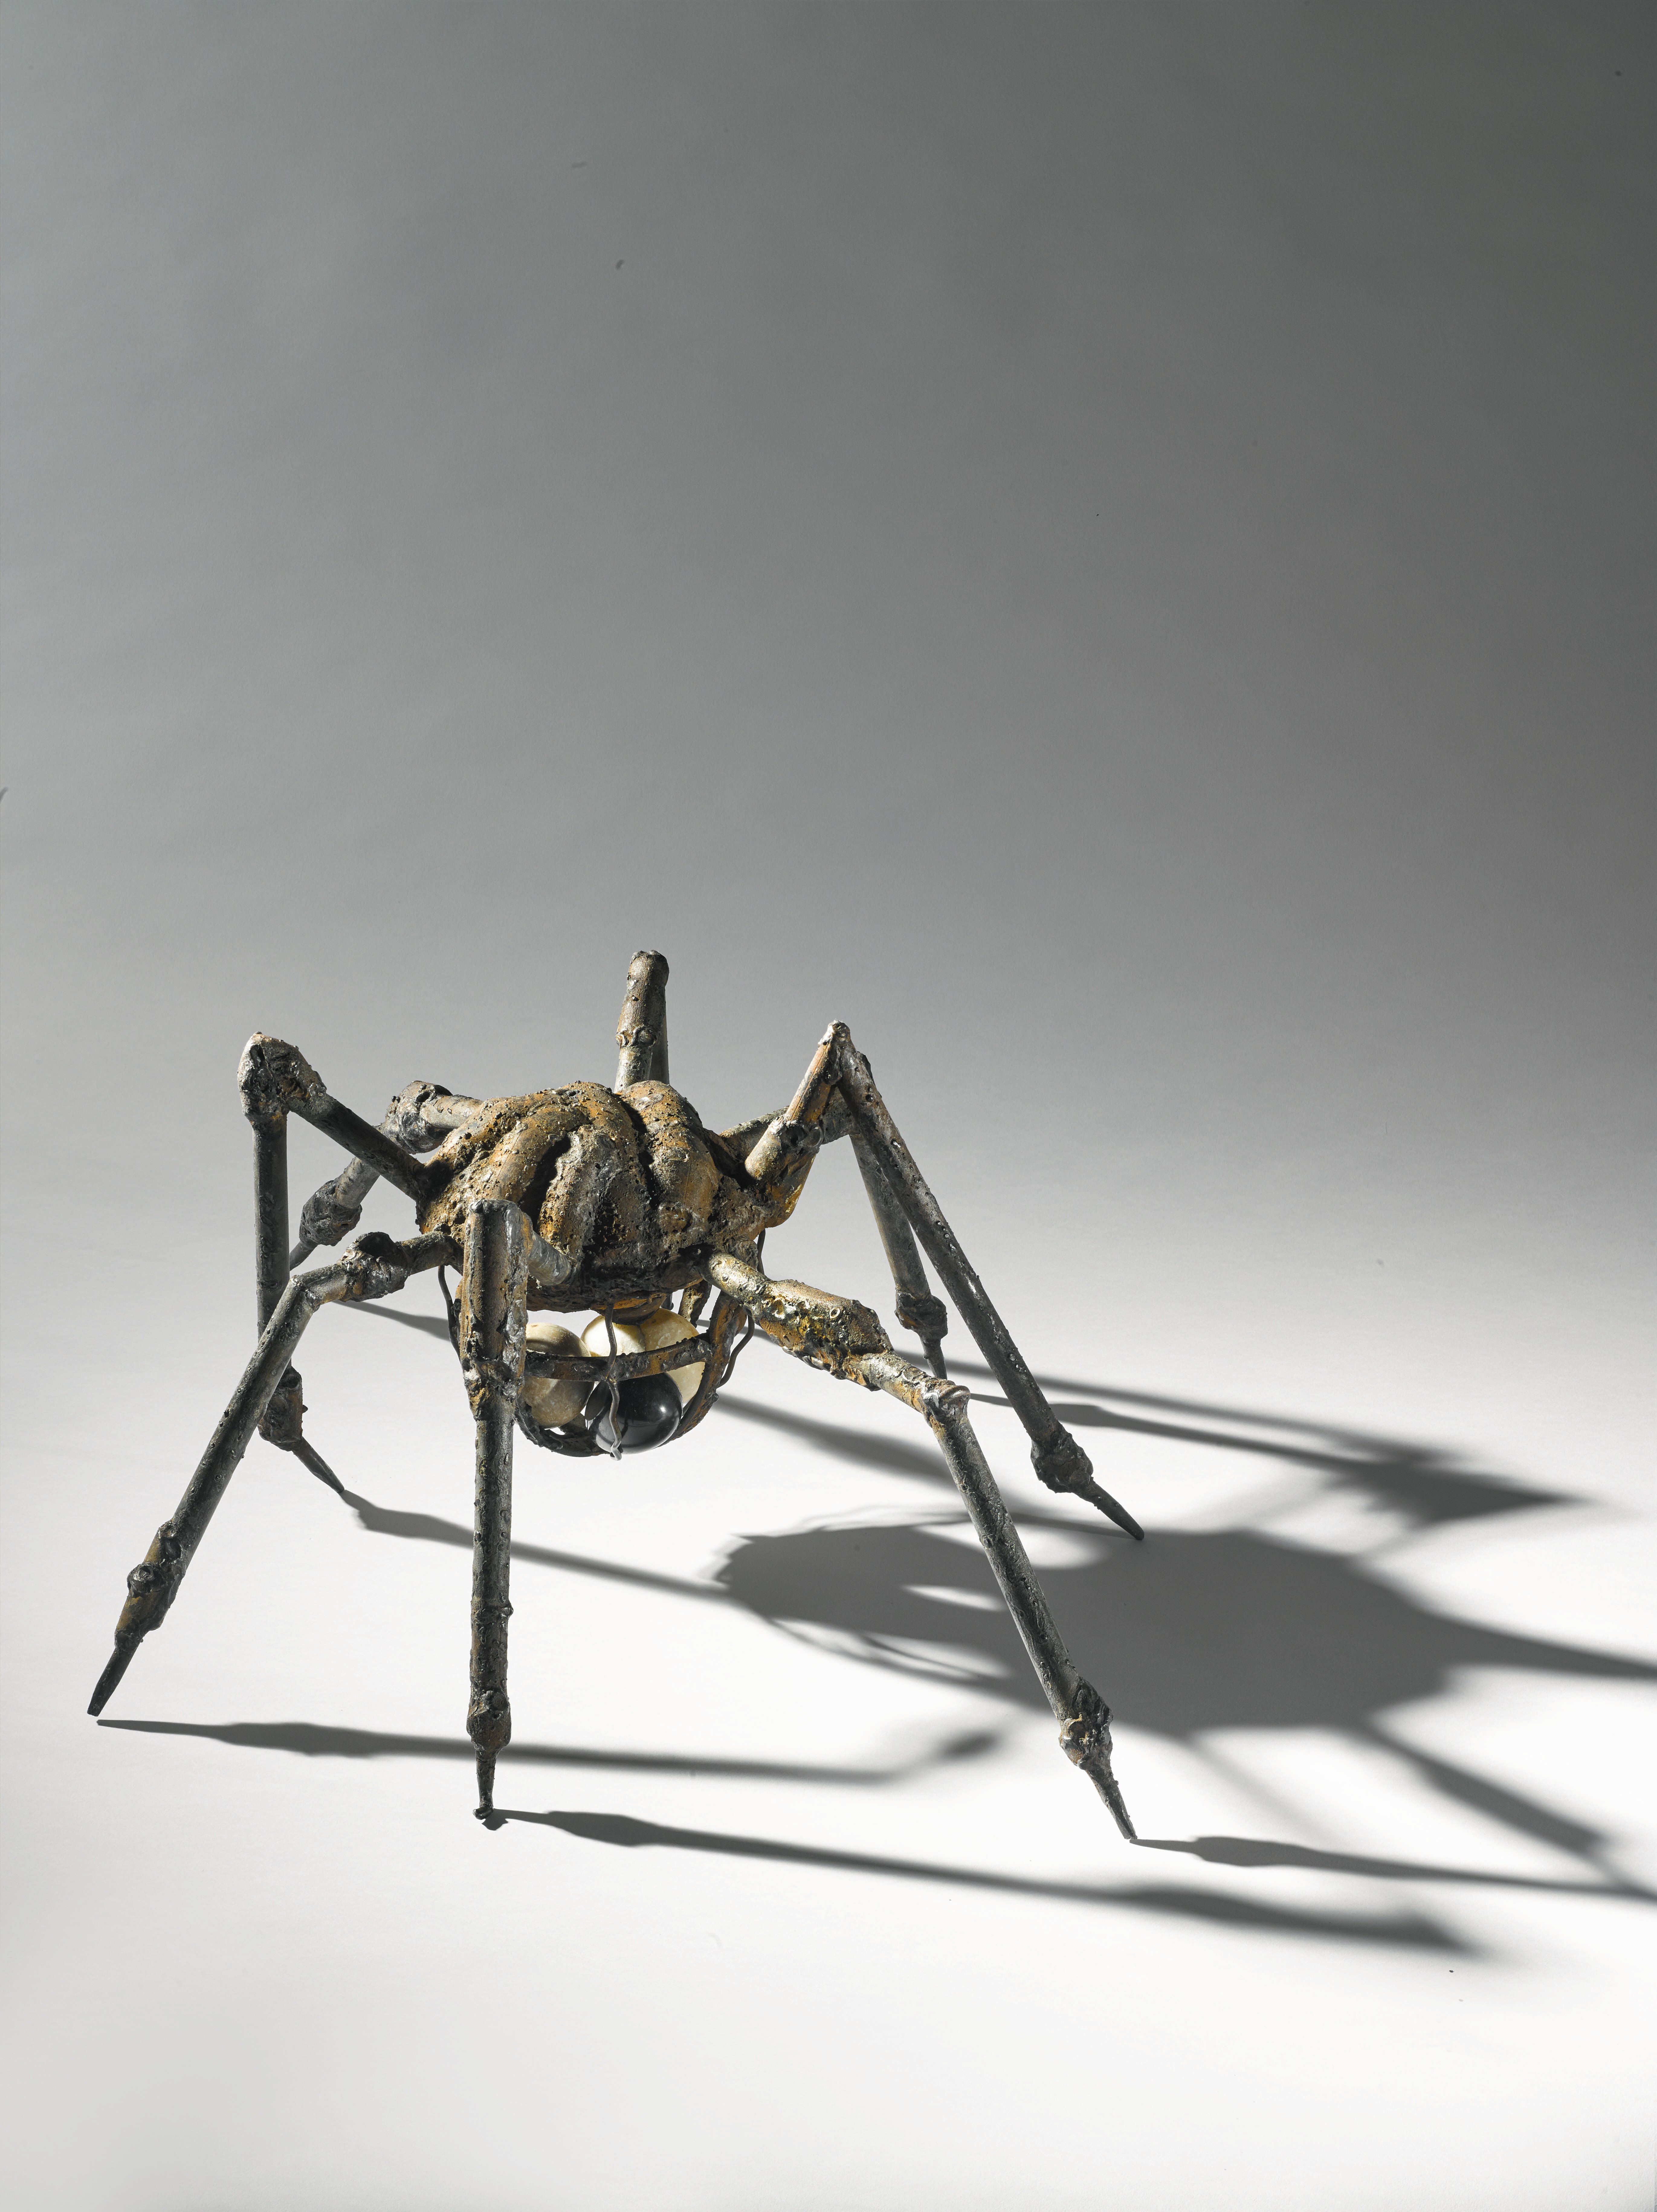 LOUISE BOURGEOIS · Made Giant Spiders and Wasn't Sorry – LASAL BOOKS